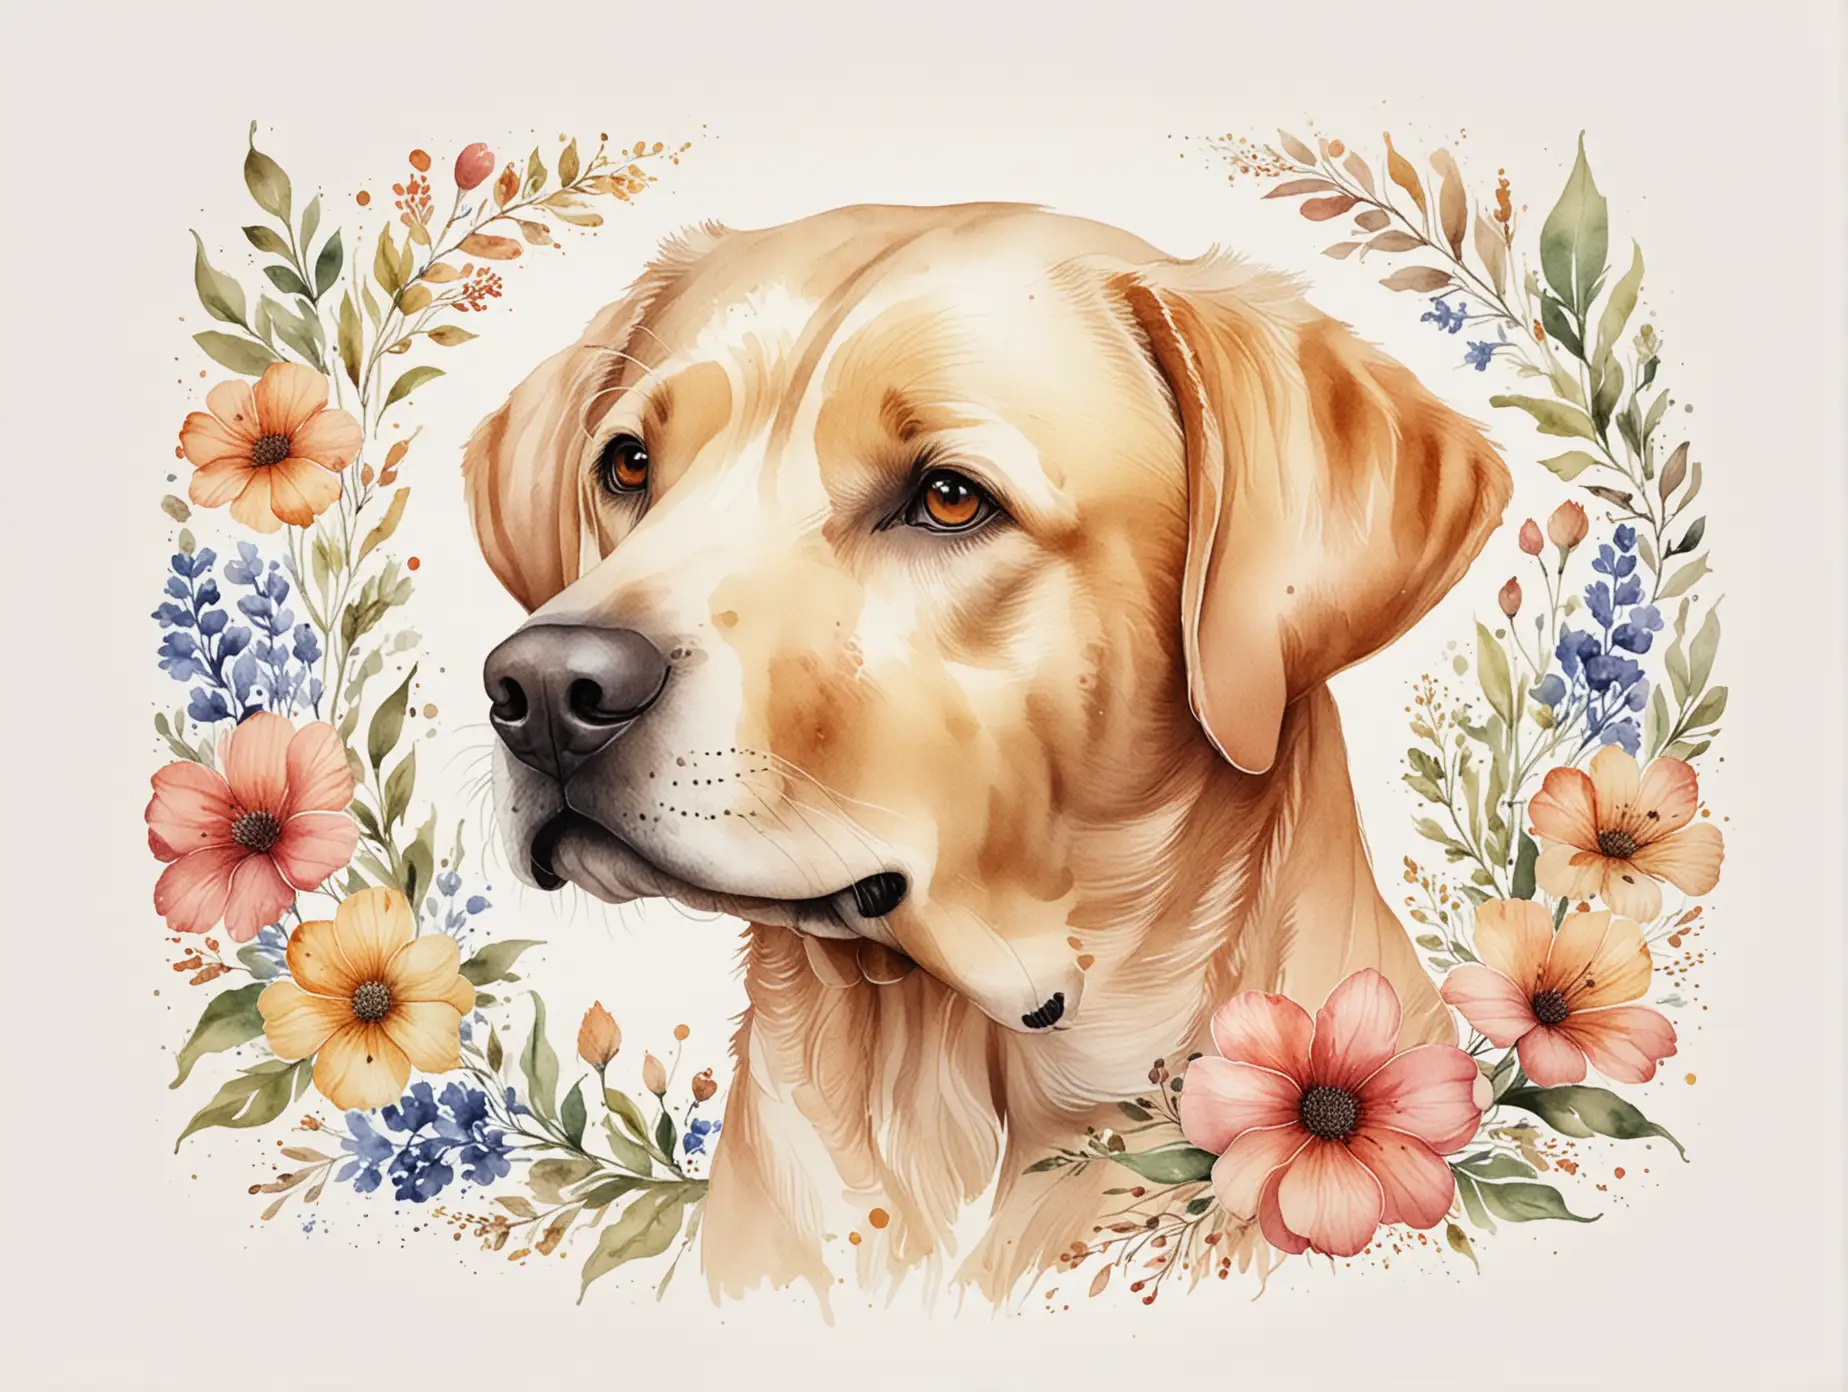 ink art styles of a beautiful labrador with a floral pattern skin in watercolors, white background